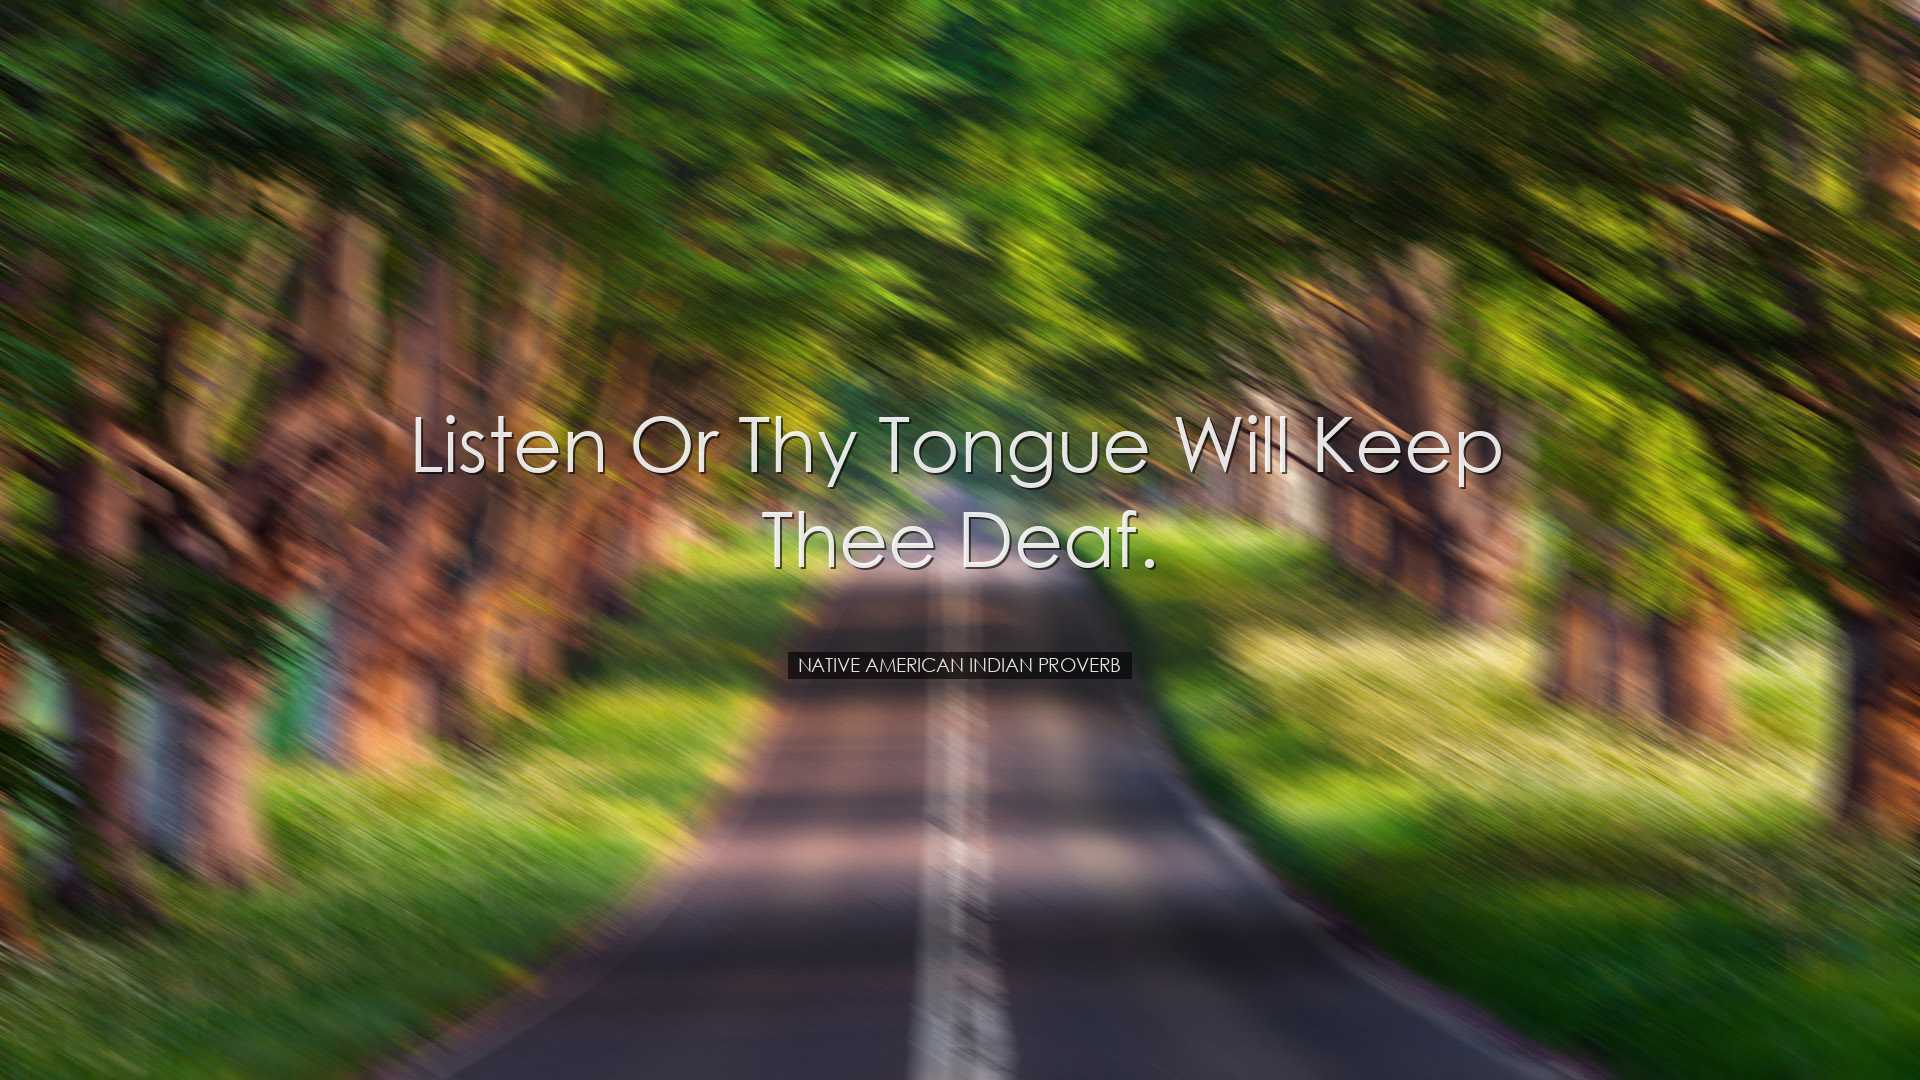 Listen or thy tongue will keep thee deaf. - Native American Indian